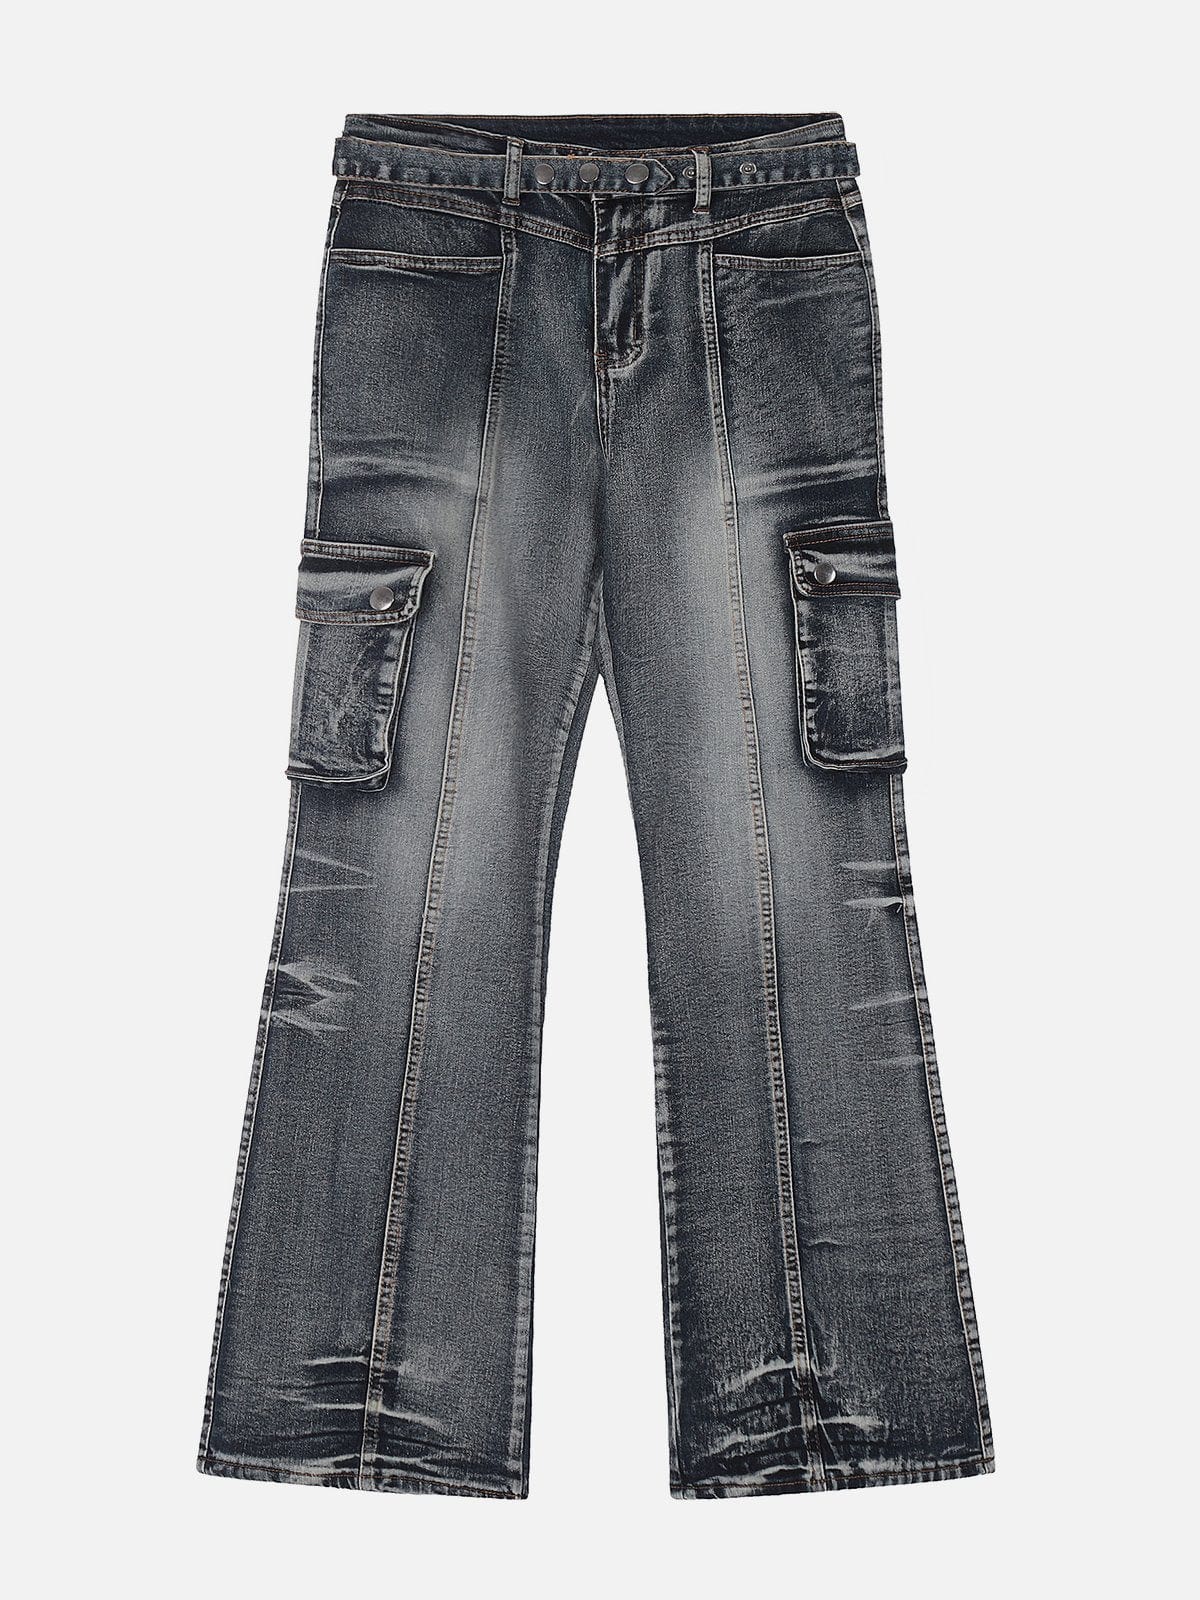 NEV Washed Distressed Patchwork Jeans